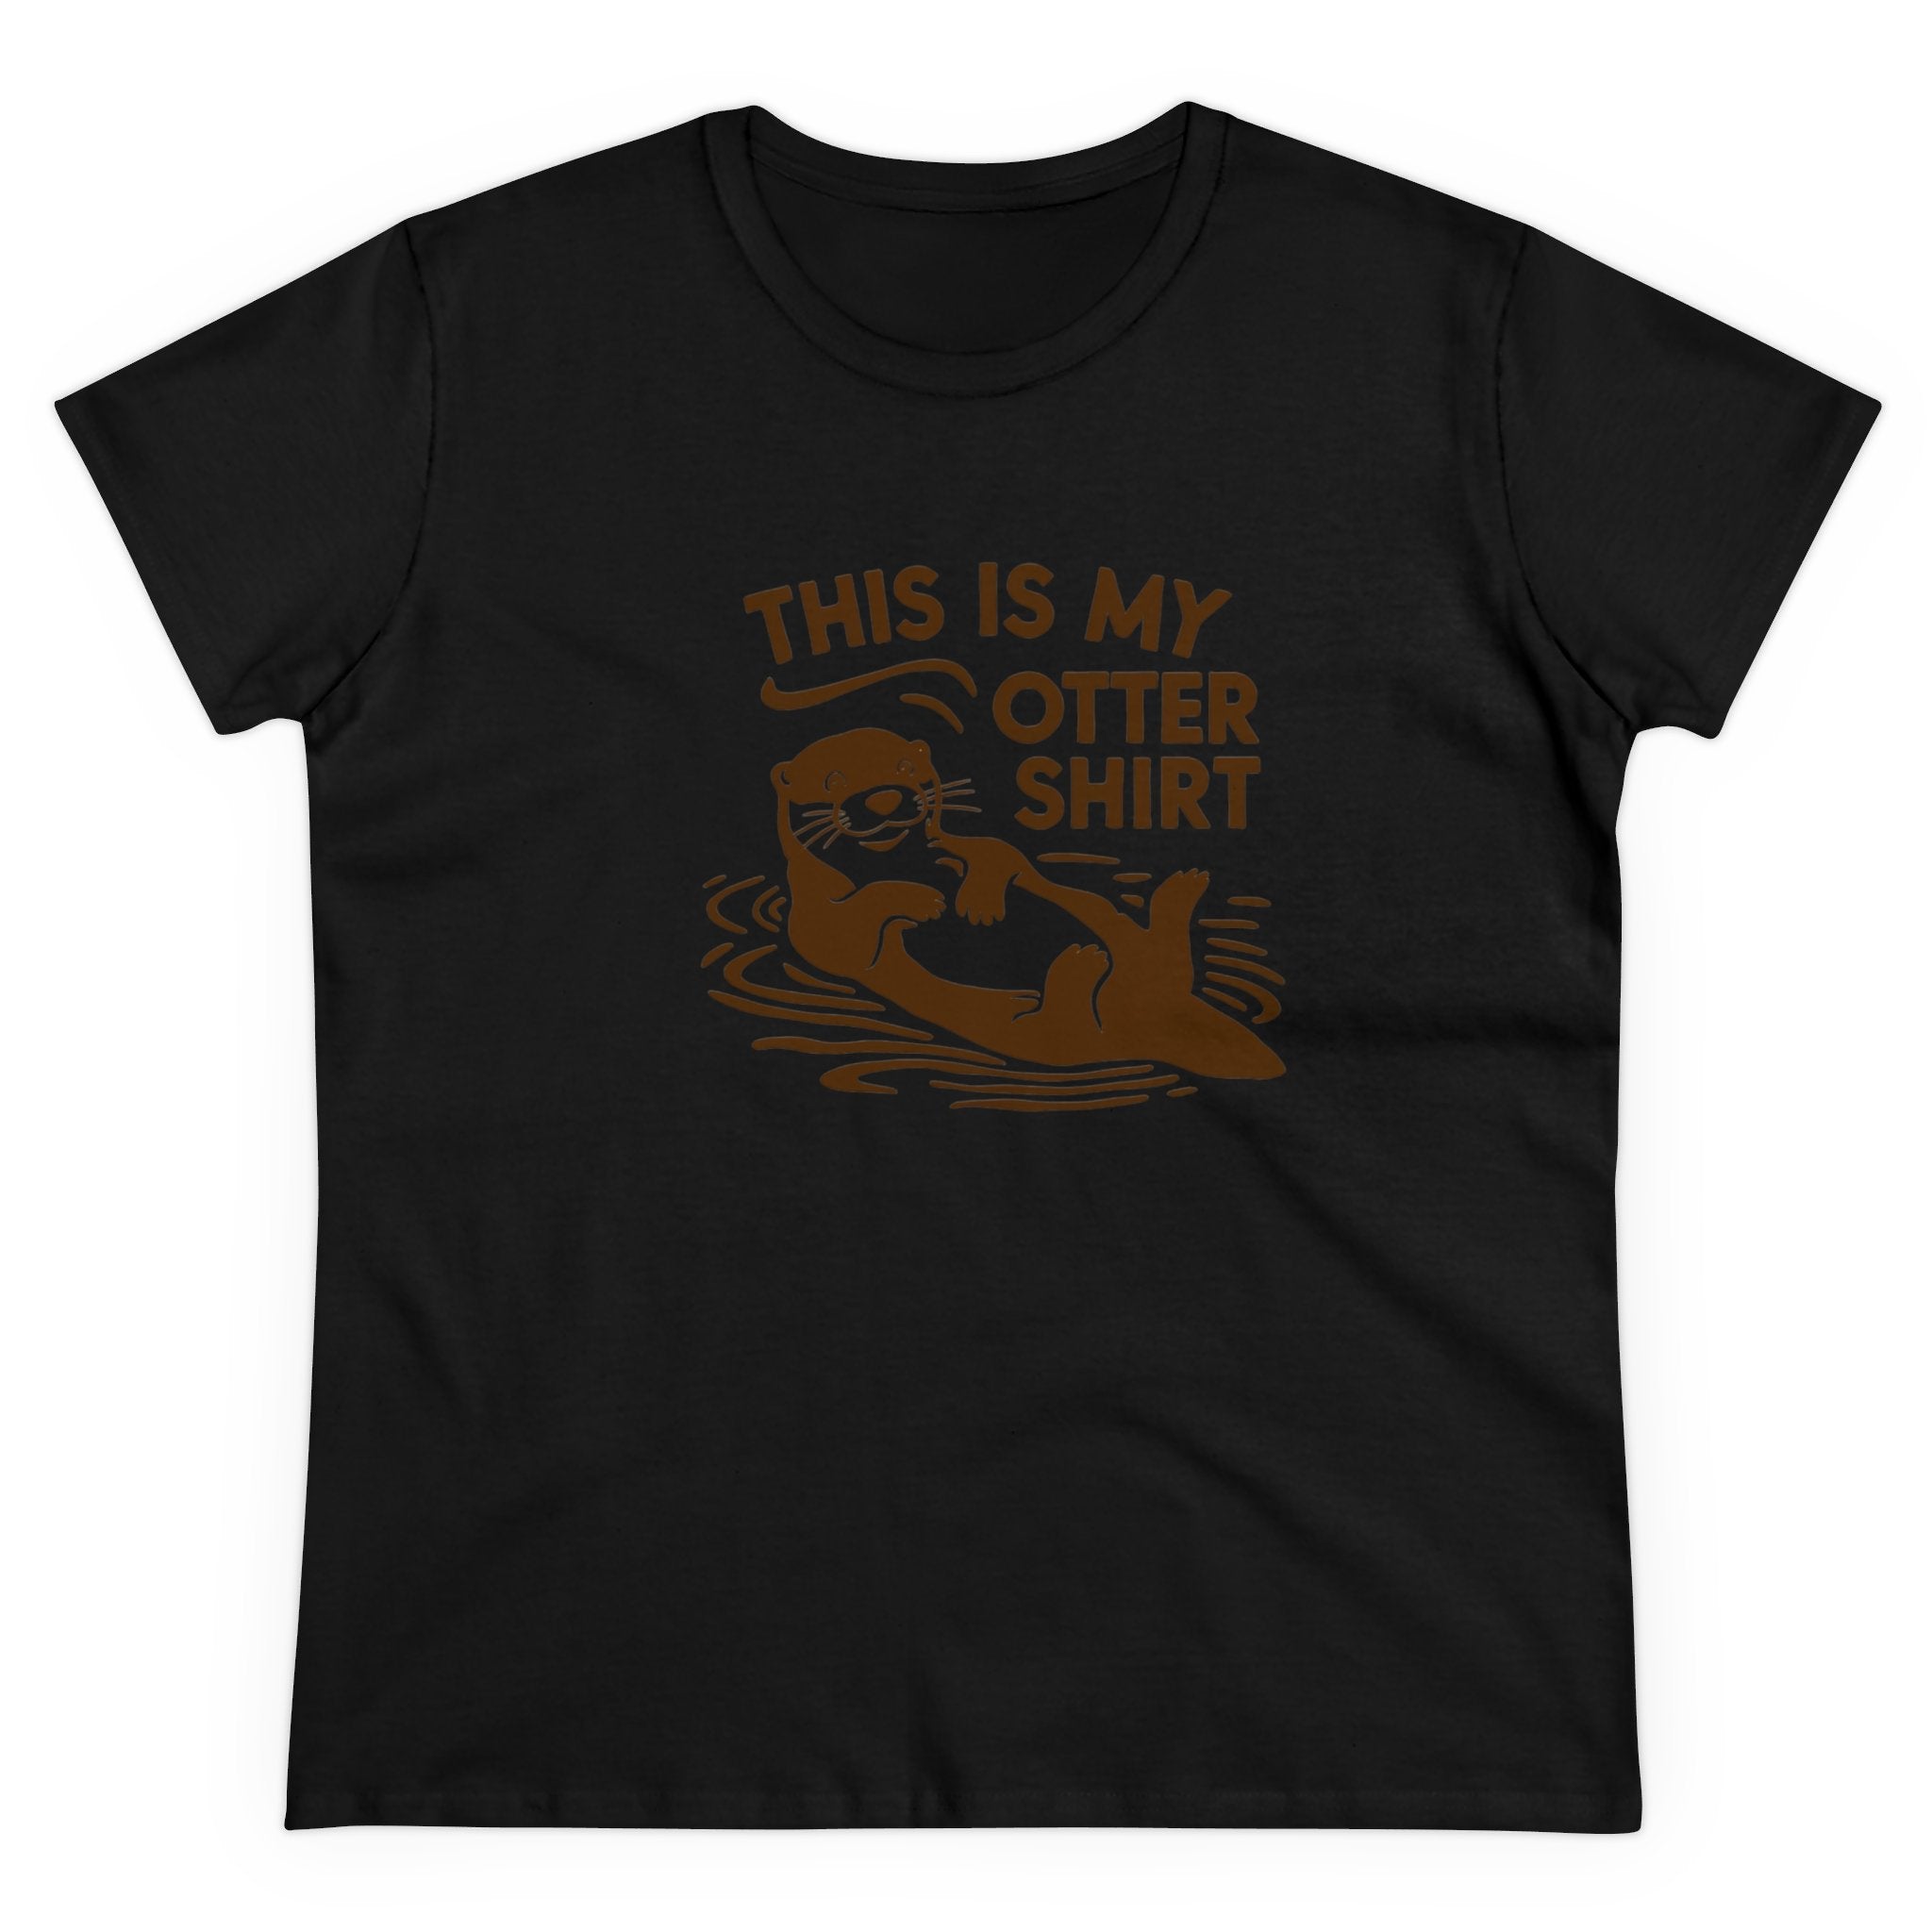 My Otter Shirt - Women's Tee: Semi-fitted black T-shirt with a brown graphic of an otter wearing sunglasses, floating on its back. Made from soft cotton, it features the text above that reads, “This is my otter shirt.” Perfect as a Women's Tee for casual day outings.